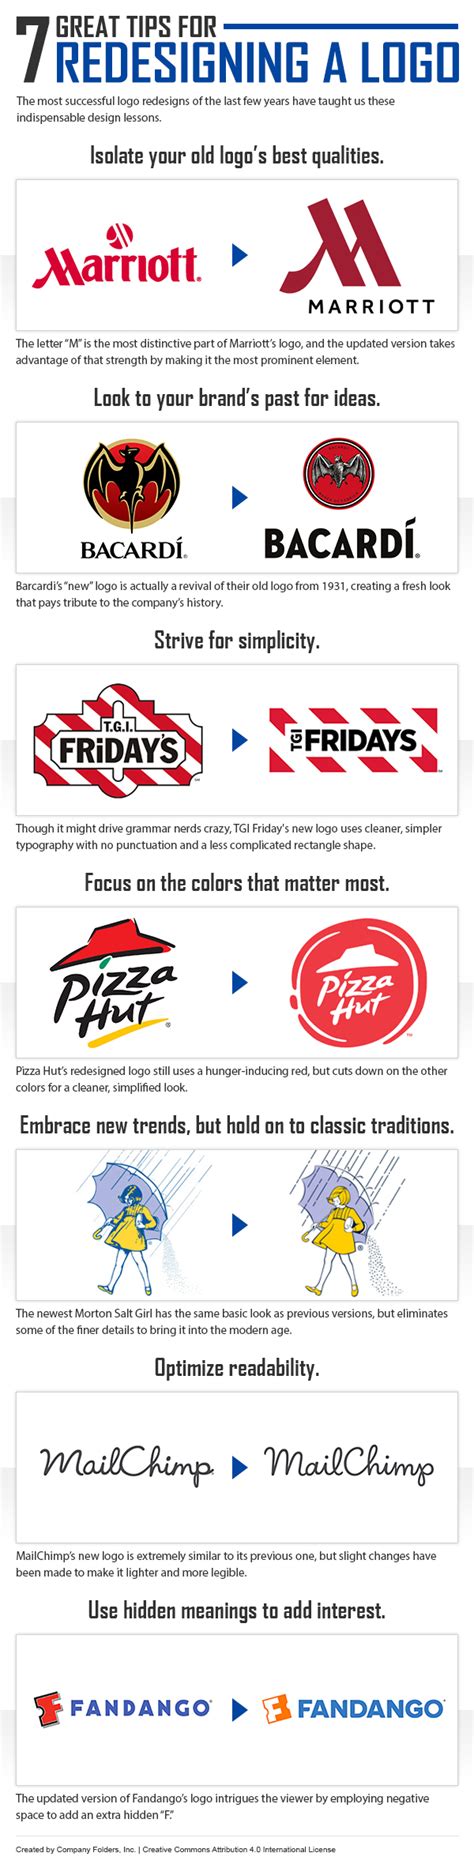 7 Lessons From The Most Successful Logo Redesigns Infographic Super